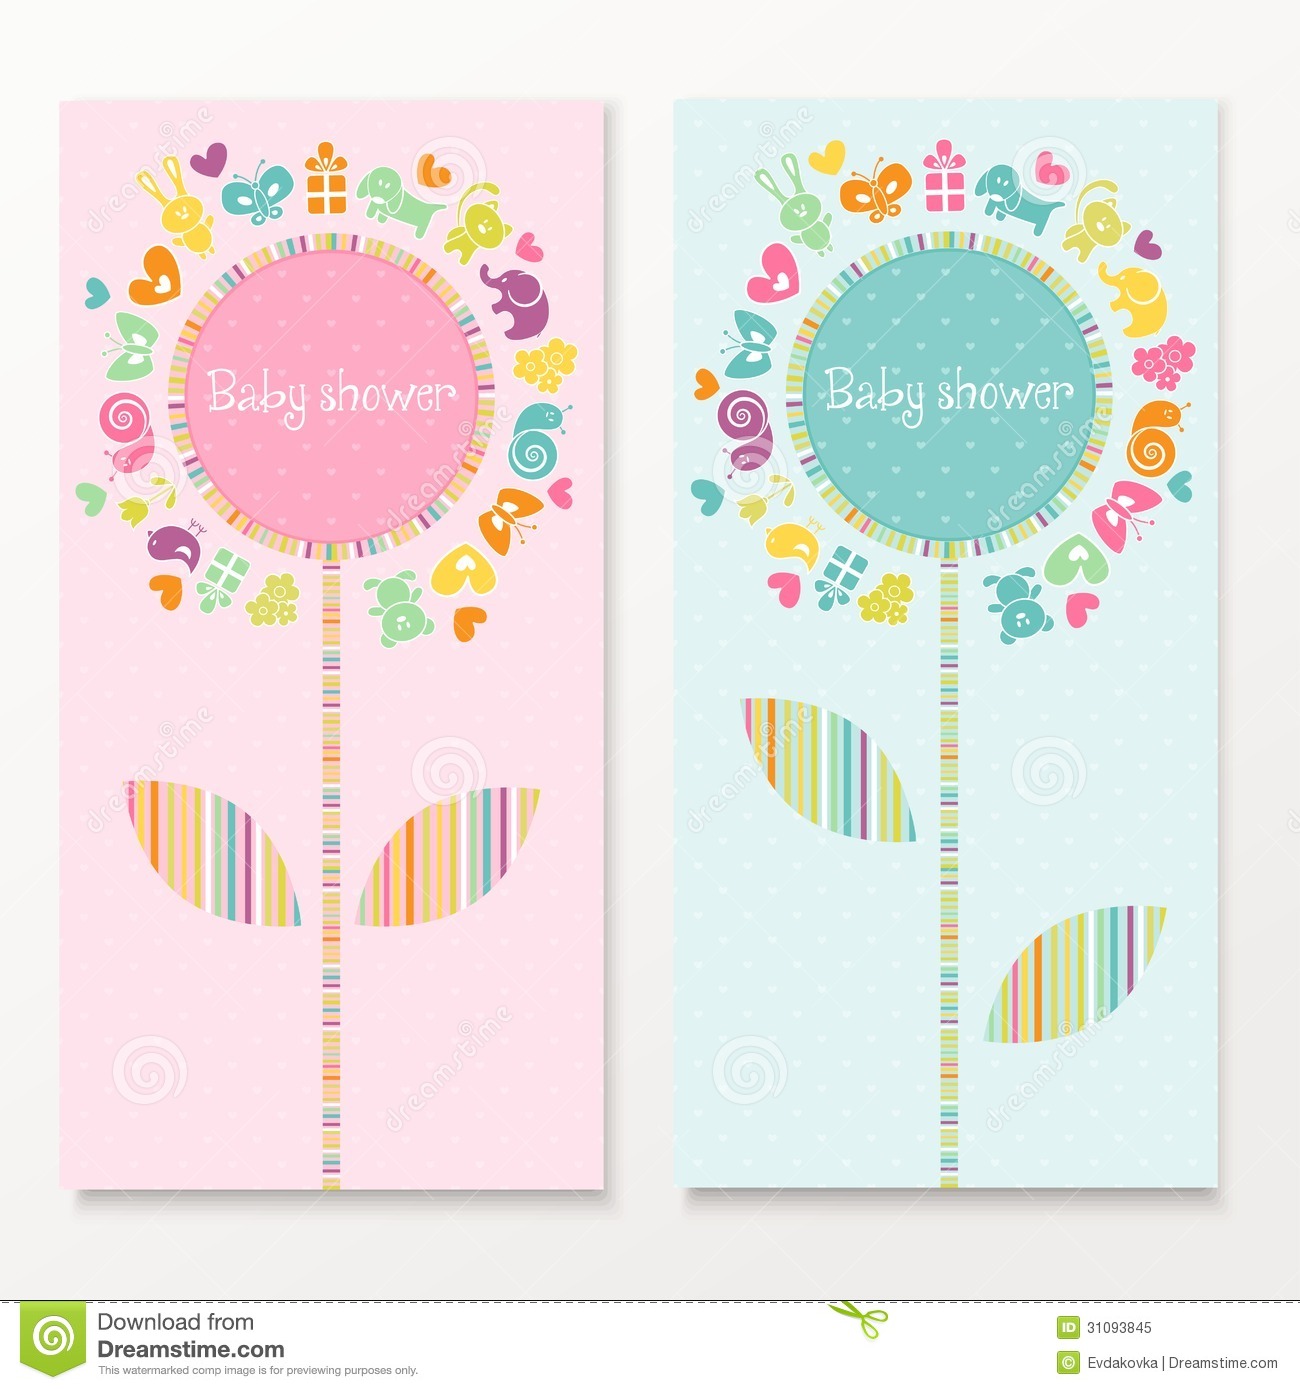 Full Size of Baby Shower:graceful Baby Shower Cards Image Designs Baby Shower Cards Baby Shower Venue Ideas Mi Baby Shower Baby Shower Thank You Baby Shower Games Baby Shower Greetings Modern Baby Shower Themes